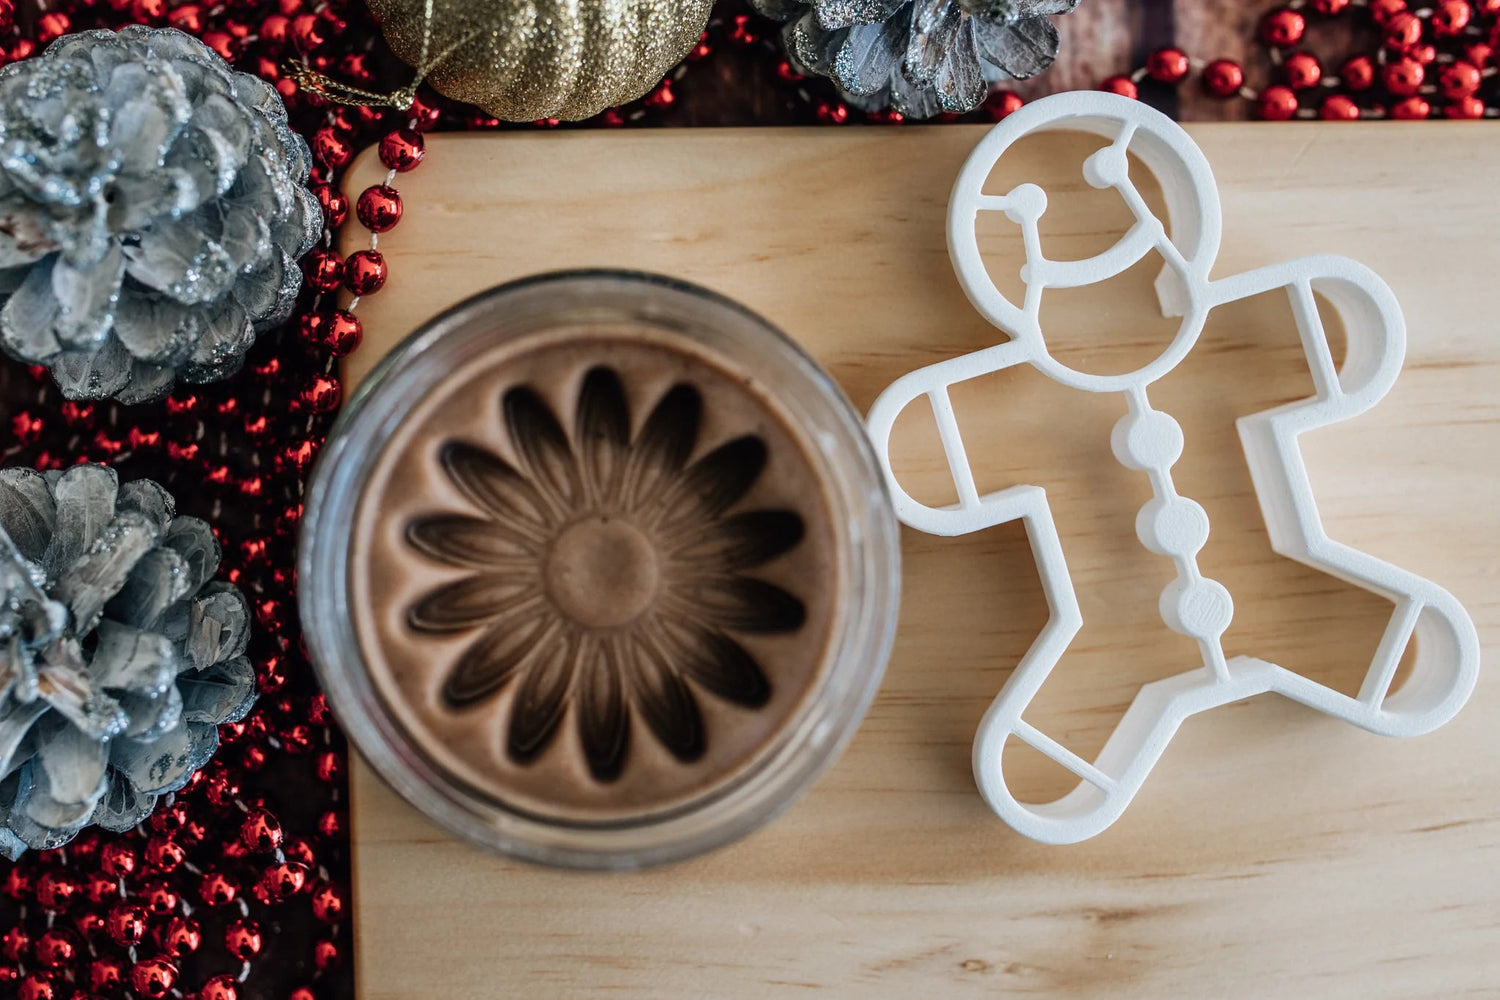 BEADIE BUG PLAY | GINGERBREAD MAN BIO CUTTER by BEADIE BUG PLAY - The Playful Collective